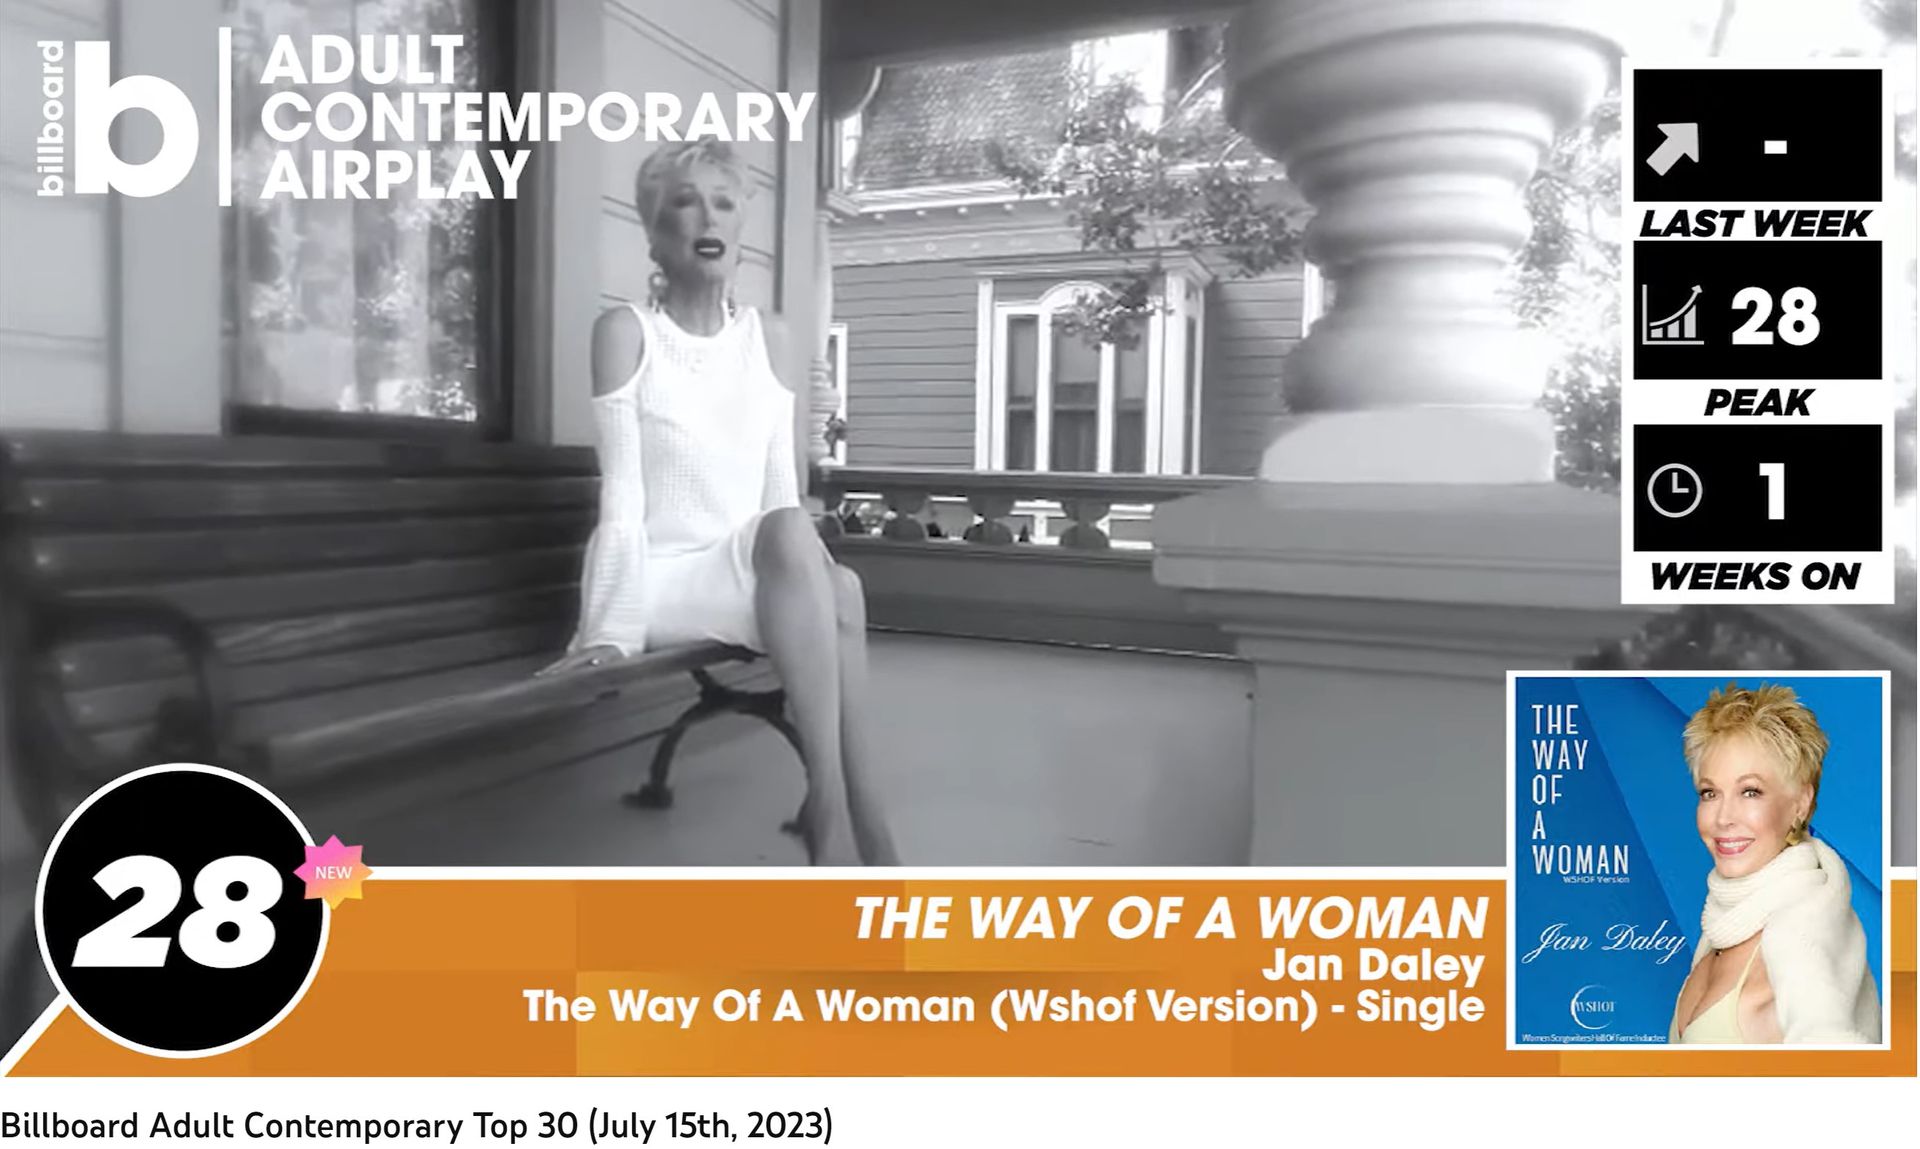 An ad for adult contemporary airplay shows a woman sitting on a bench